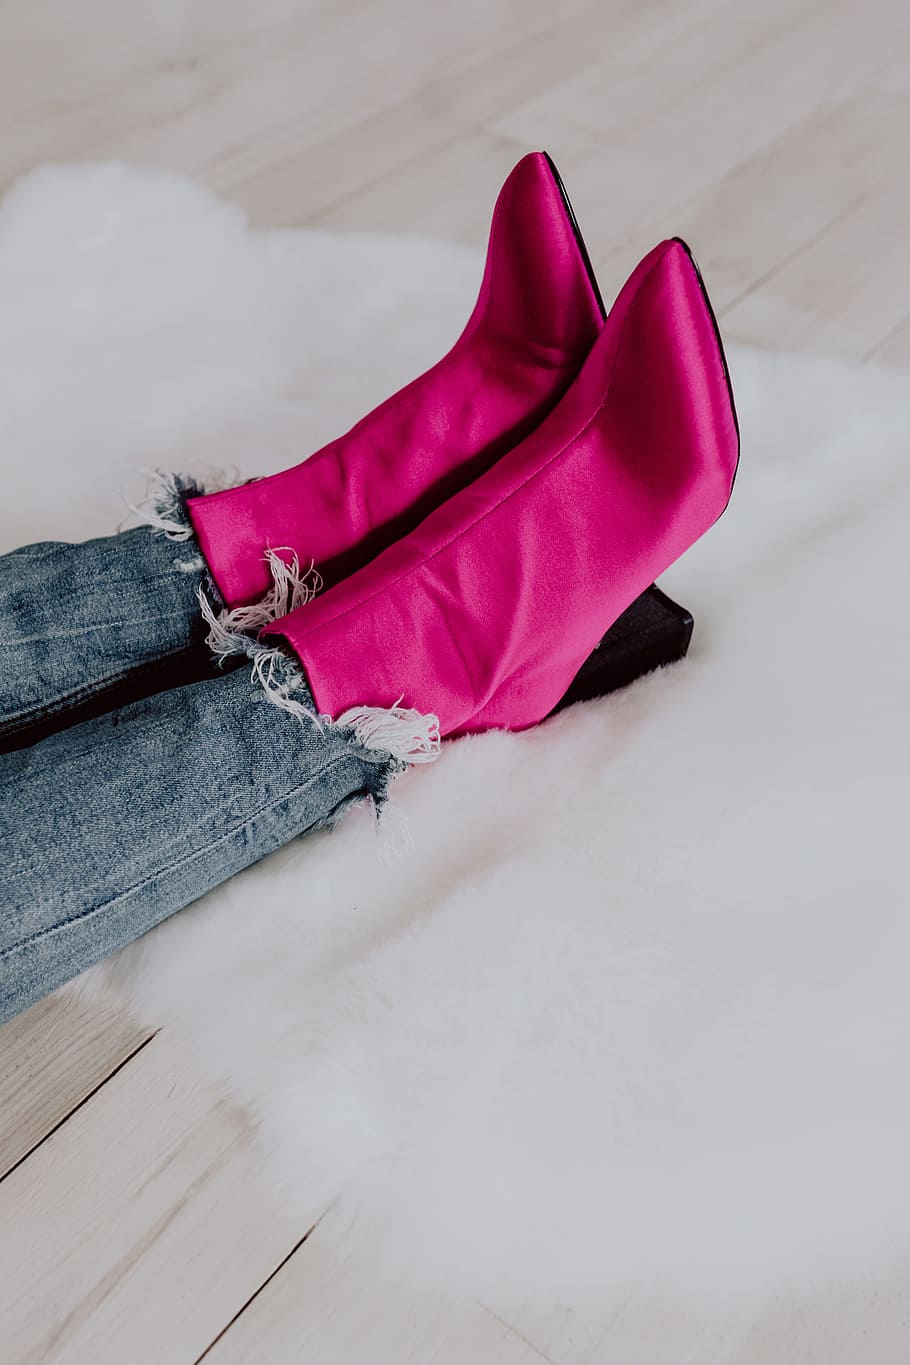 woman, pink, boots, blue, jeans, pink boots, pink shoes, legs, blues jeans, fashion